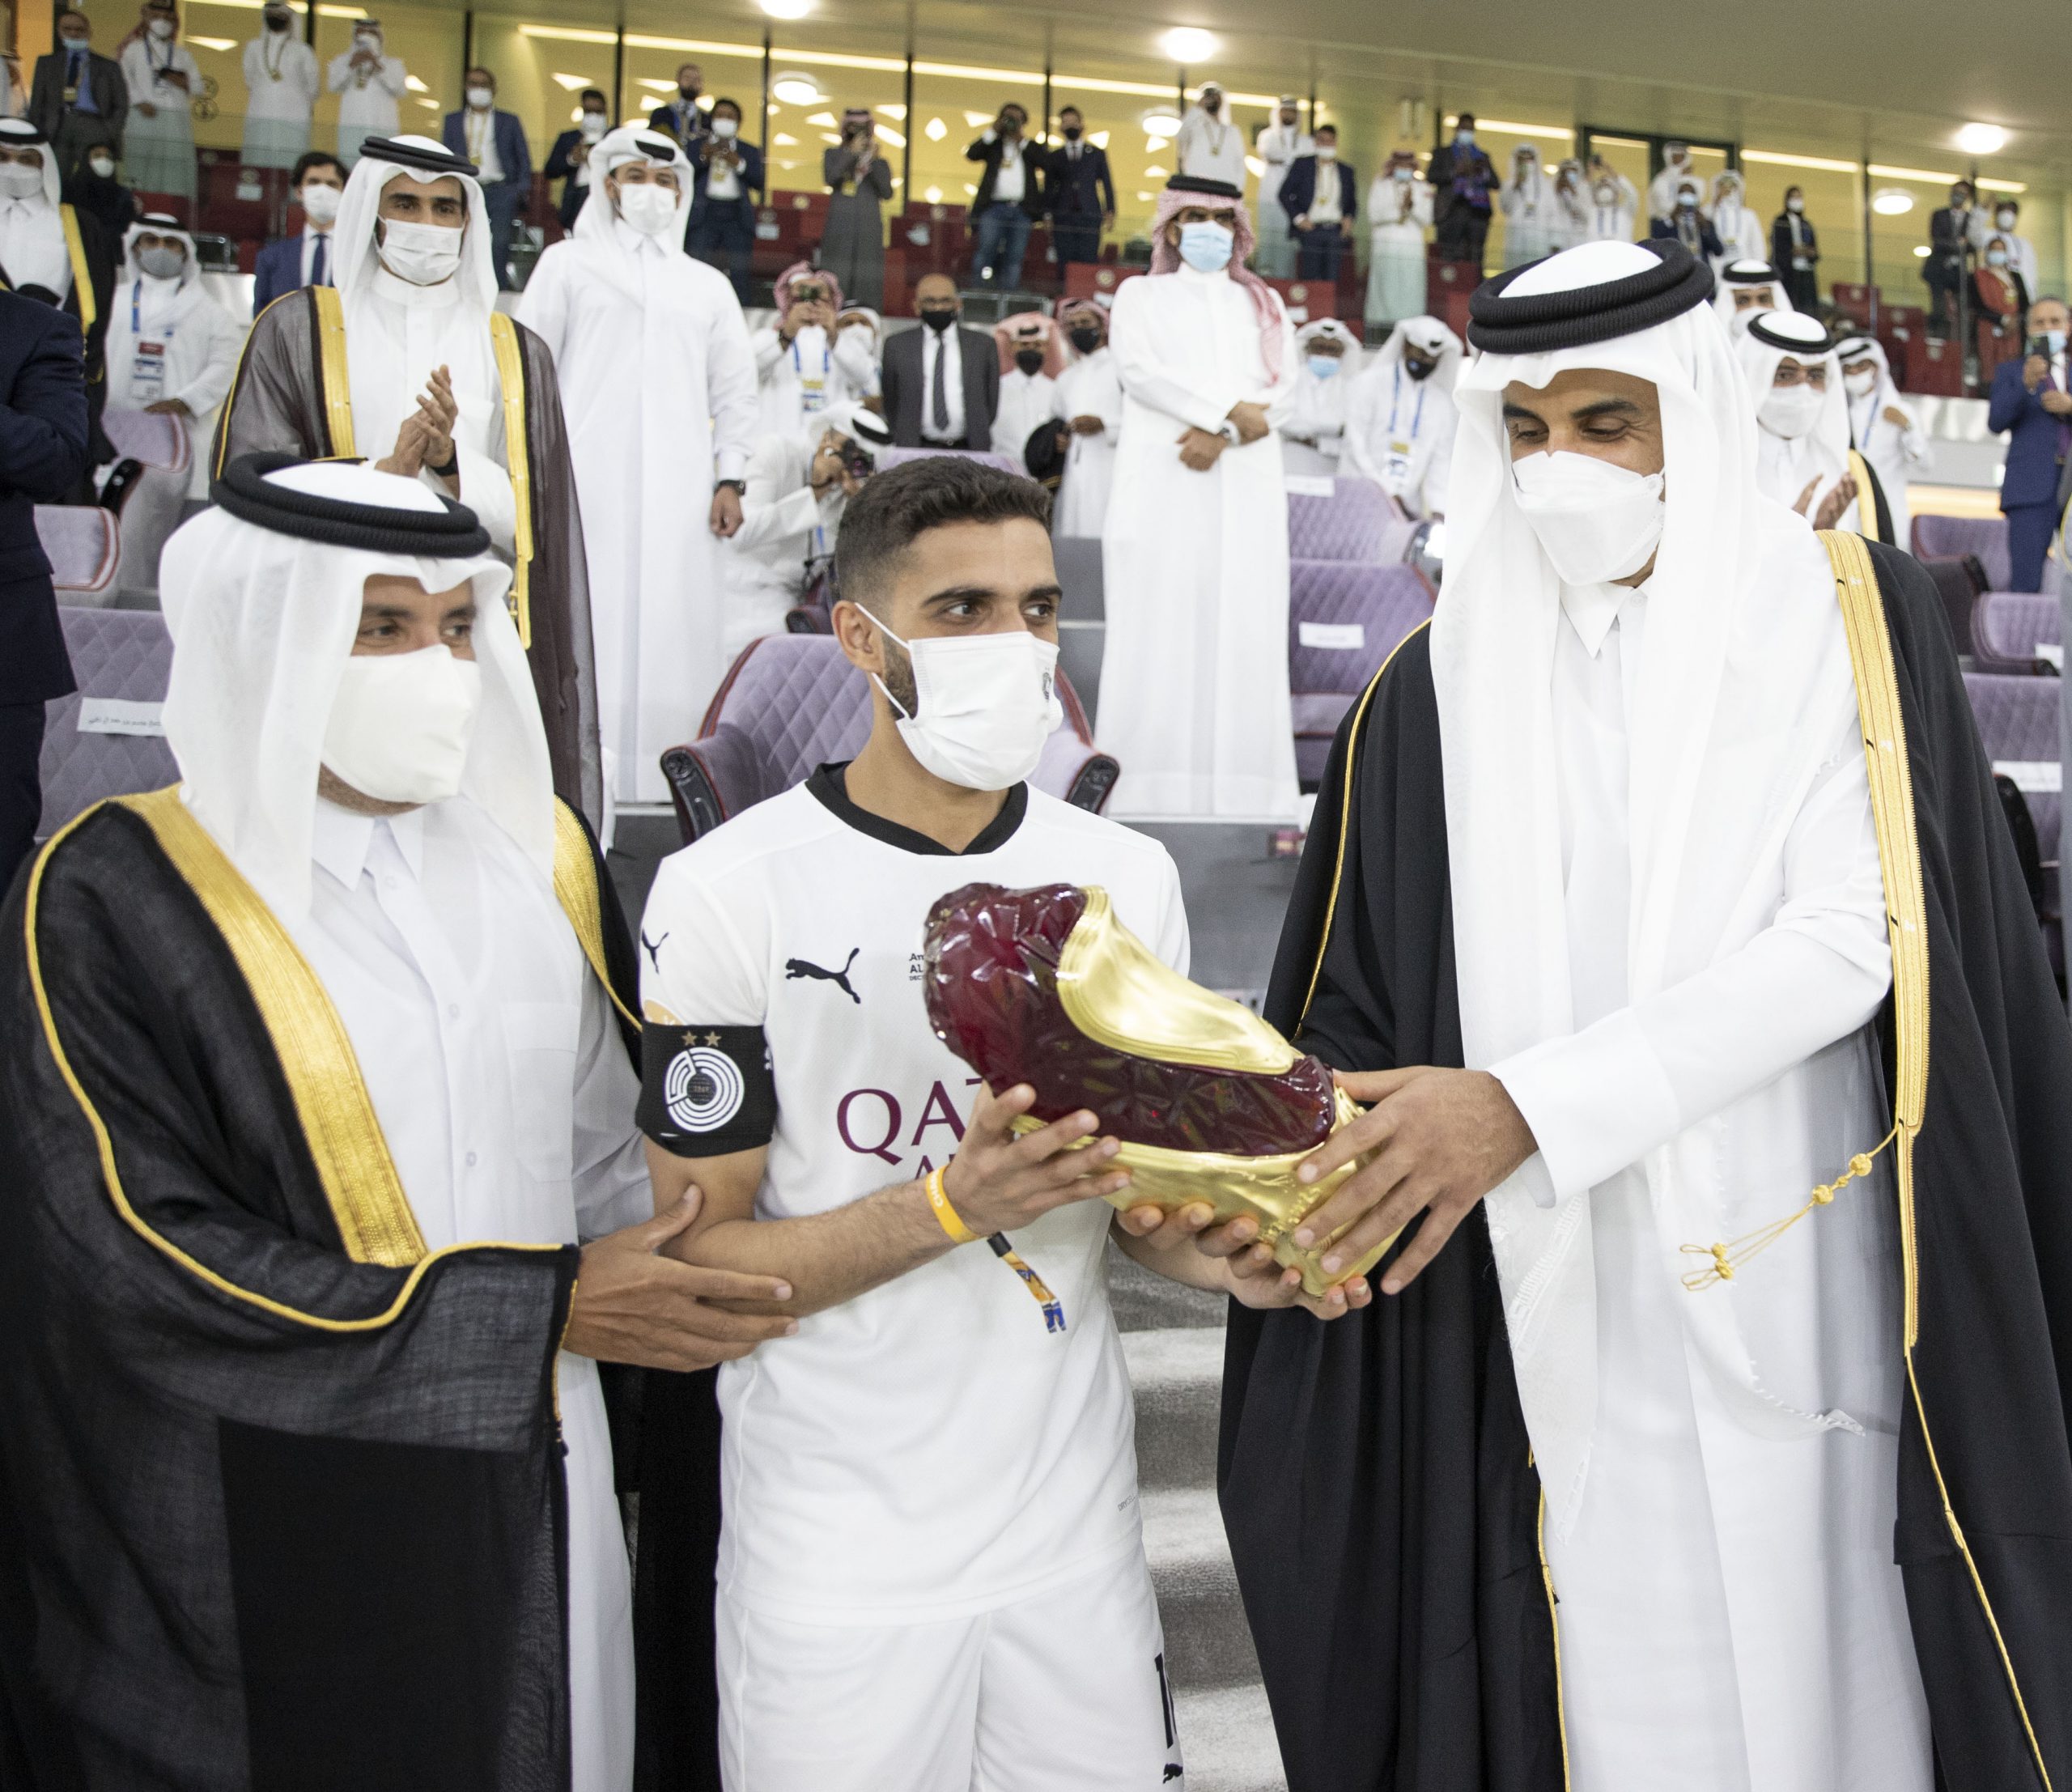 HH the Amir Attends Final of the Amir Cup